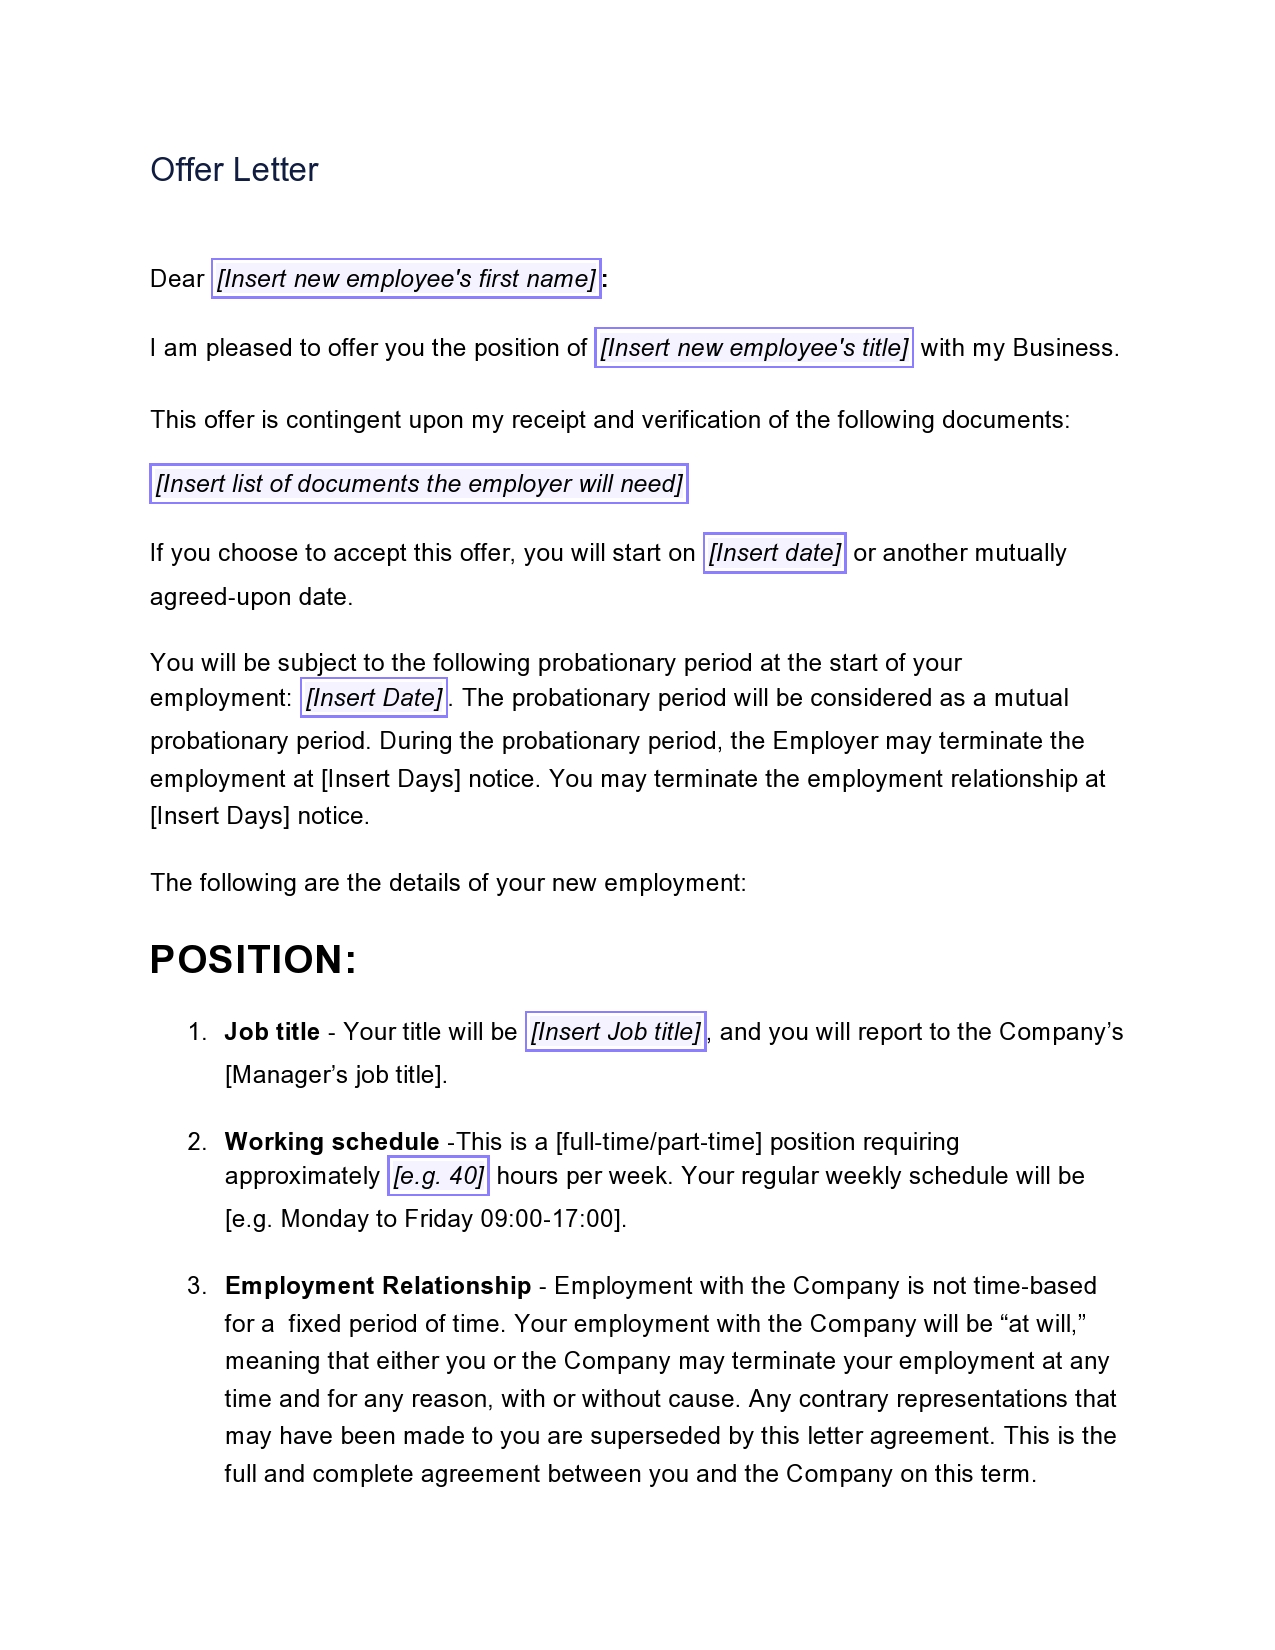 Free employment offer letter template 21